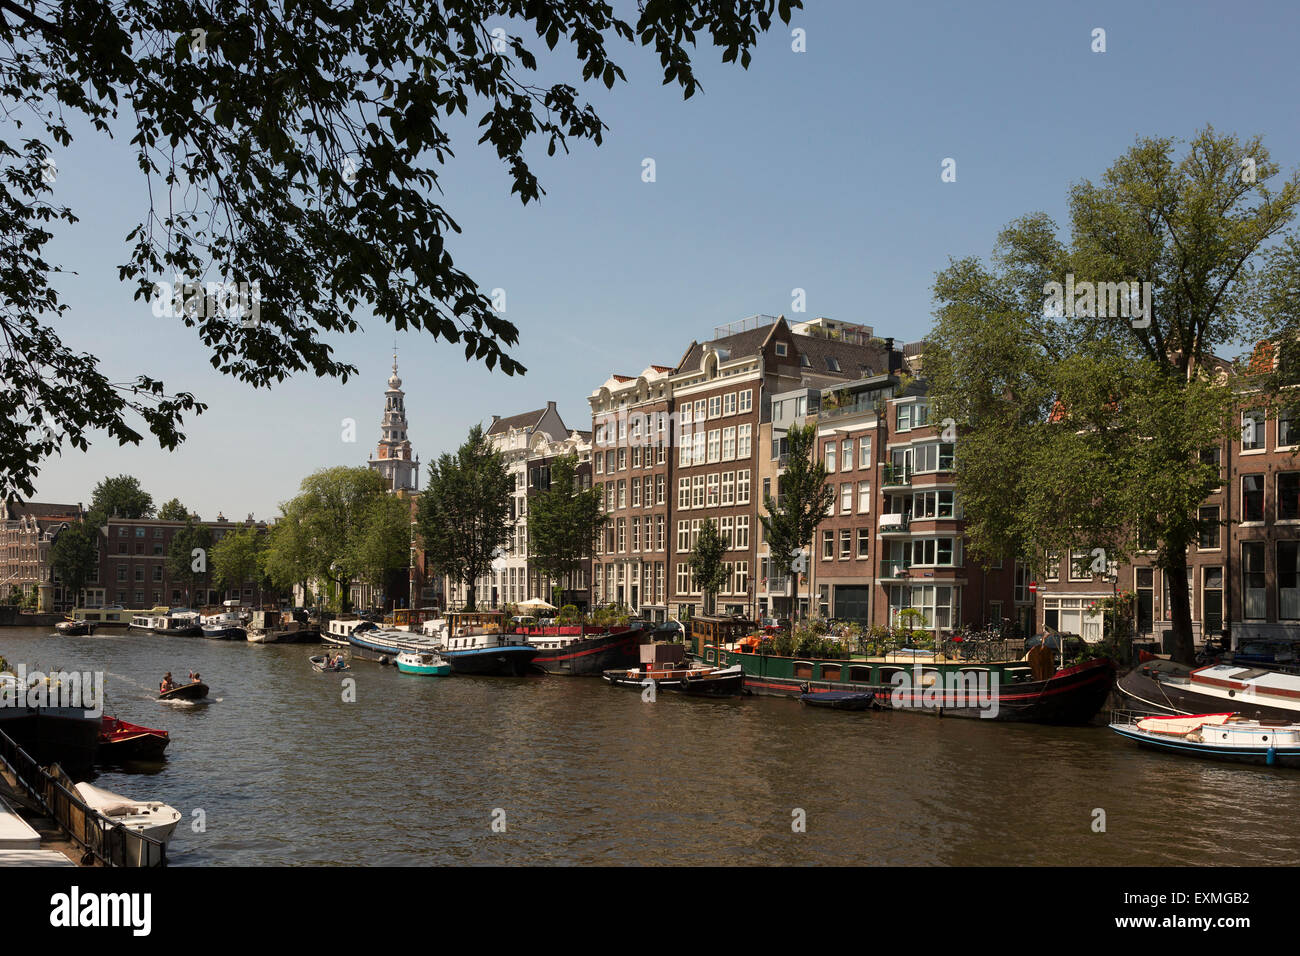 Boats and buildings on Oudeschans or Oude Schans canal or gracht in Amsterdam, North Holland, The Netherlands Stock Photo